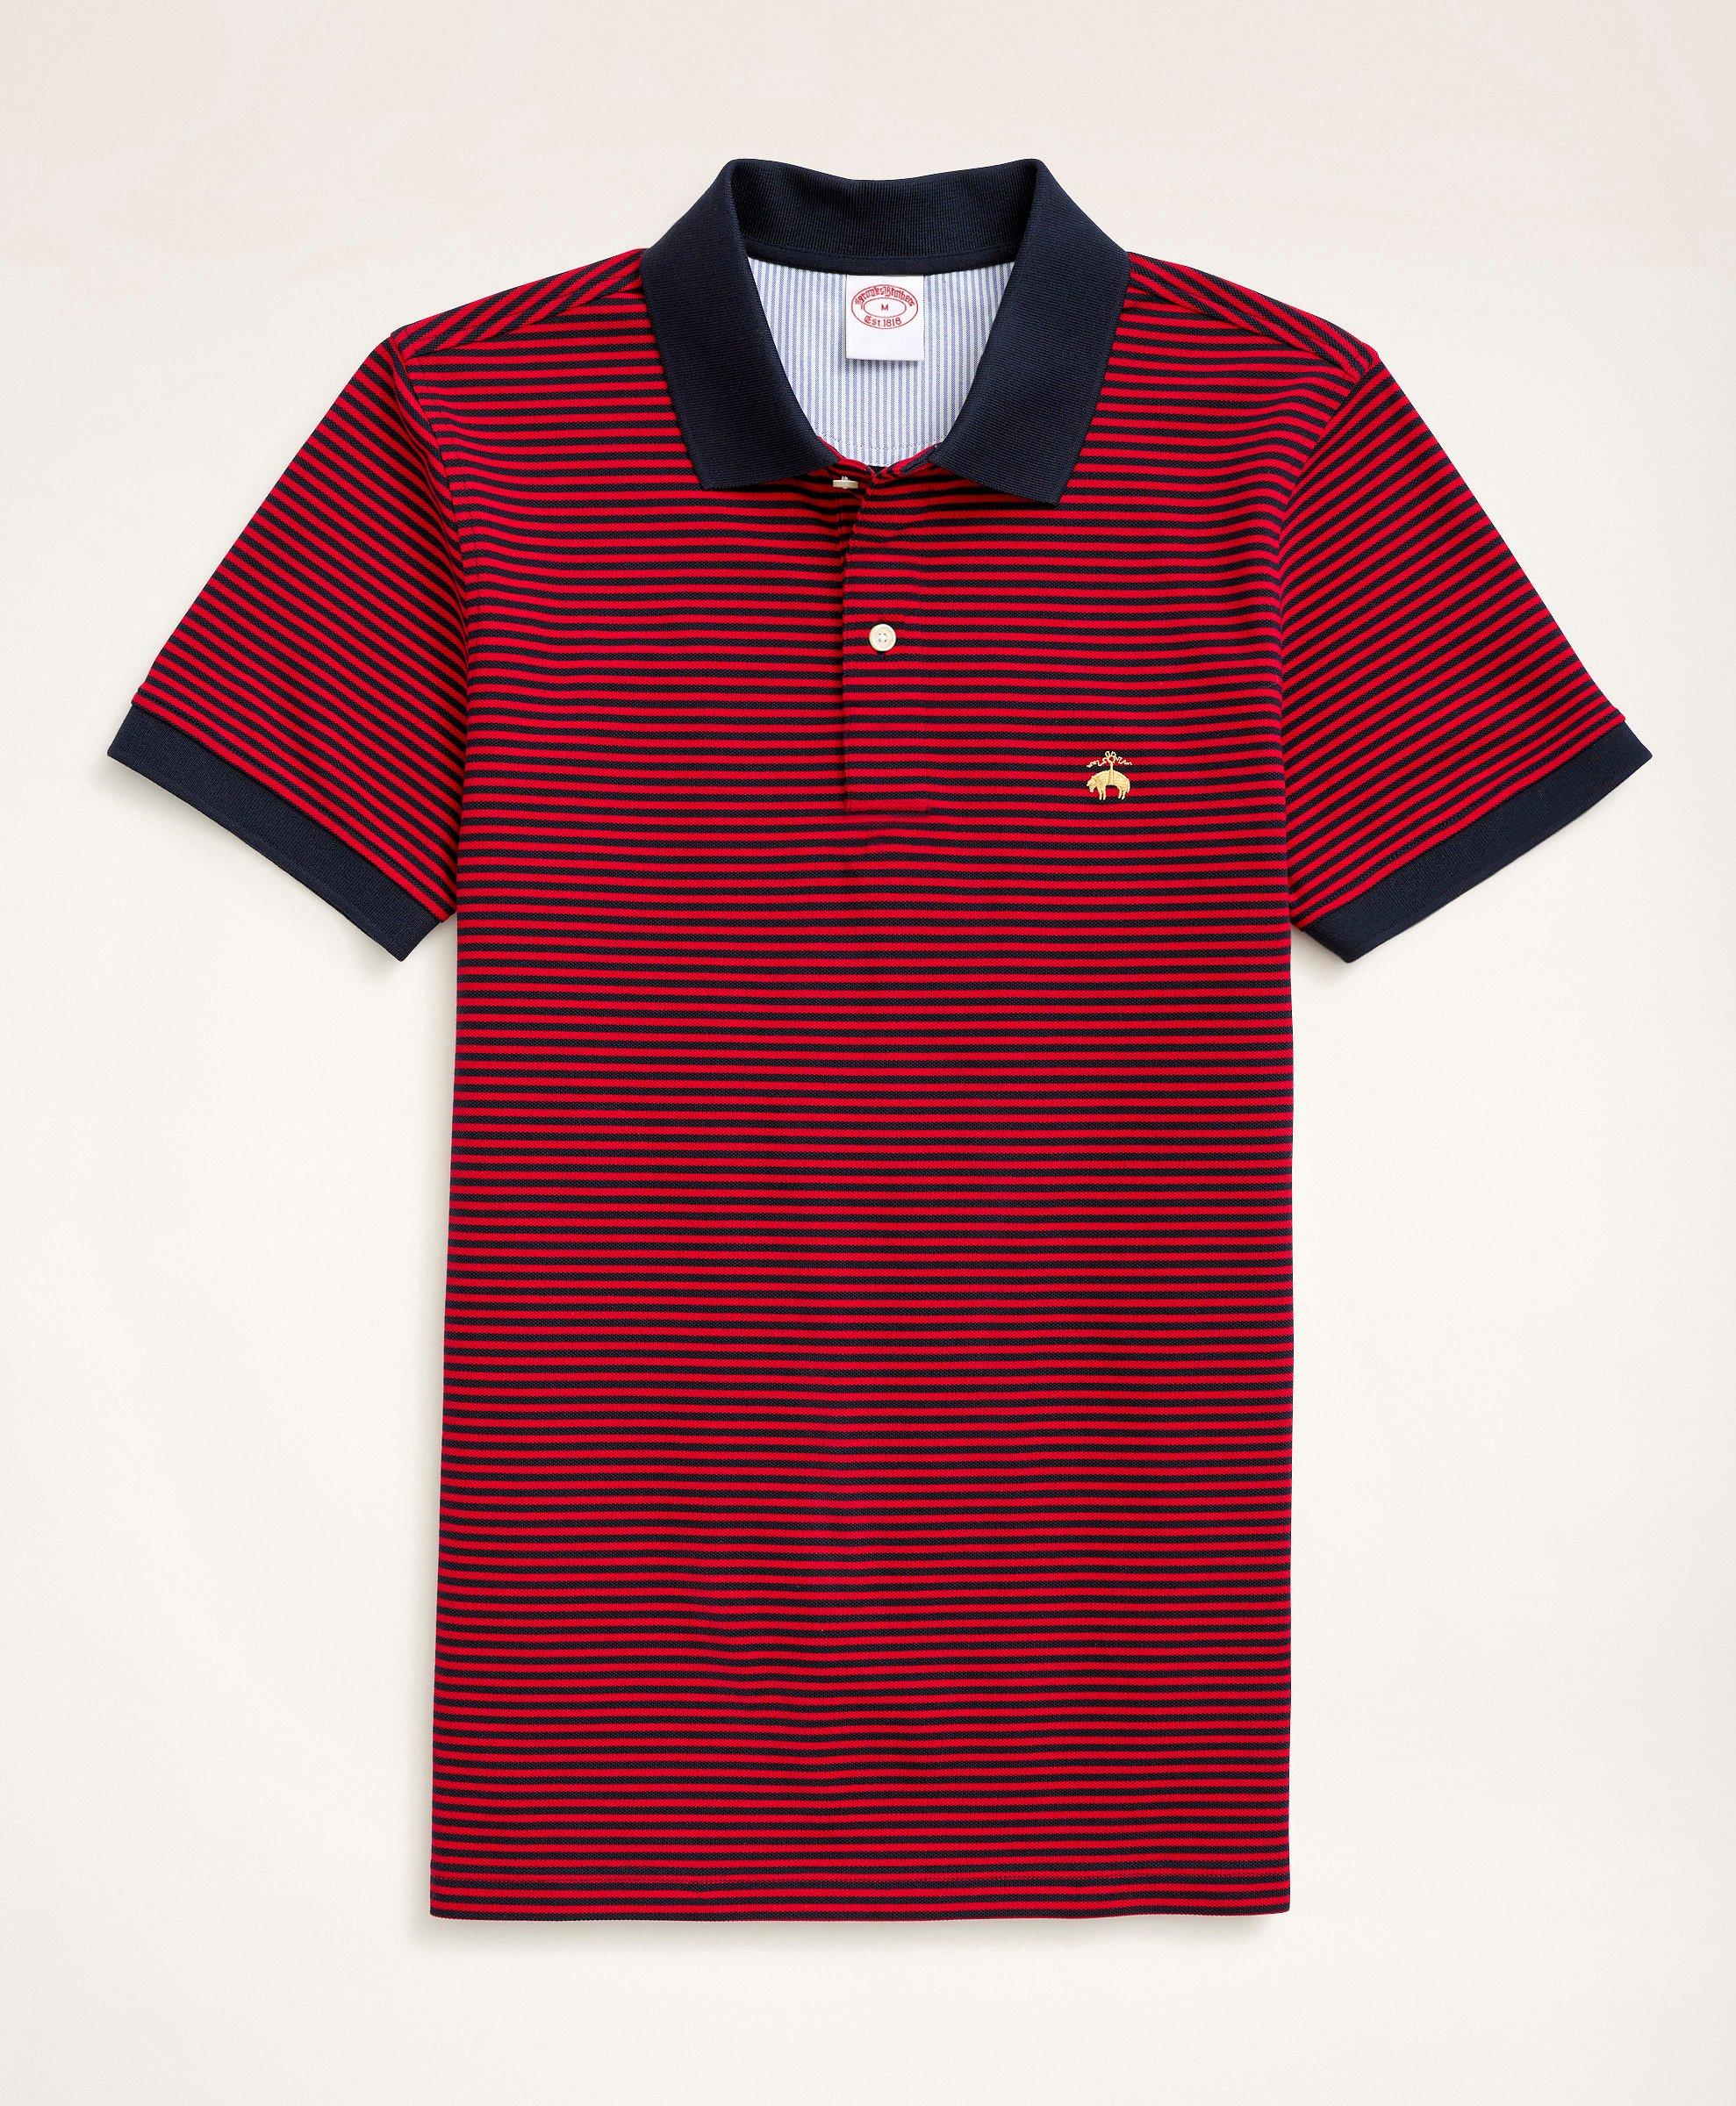 Brooks Brothers Golden Fleece Original Fit Feeder Stripe Polo Shirt | Red | Size Xs